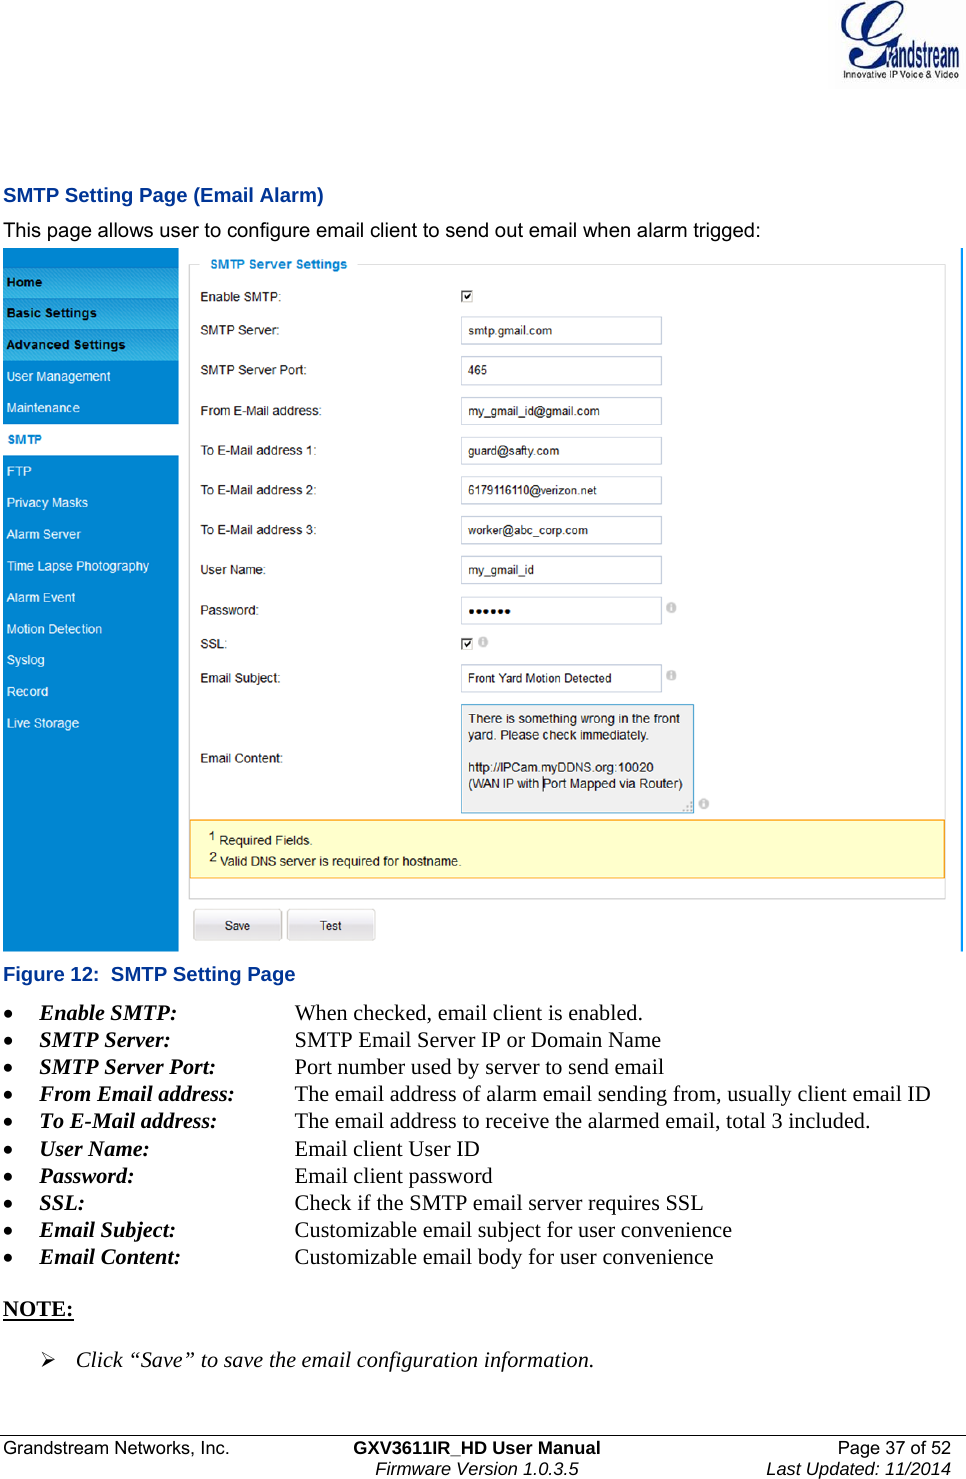  Grandstream Networks, Inc.  GXV3611IR_HD User Manual  Page 37 of 52    Firmware Version 1.0.3.5  Last Updated: 11/2014    SMTP Setting Page (Email Alarm) This page allows user to configure email client to send out email when alarm trigged:  Figure 12:  SMTP Setting Page  Enable SMTP:      When checked, email client is enabled.  SMTP Server:    SMTP Email Server IP or Domain Name  SMTP Server Port:   Port number used by server to send email  From Email address:   The email address of alarm email sending from, usually client email ID  To E-Mail address:    The email address to receive the alarmed email, total 3 included.   User Name:     Email client User ID  Password:      Email client password  SSL:      Check if the SMTP email server requires SSL  Email Subject:    Customizable email subject for user convenience  Email Content:    Customizable email body for user convenience   NOTE:    Click “Save” to save the email configuration information. 